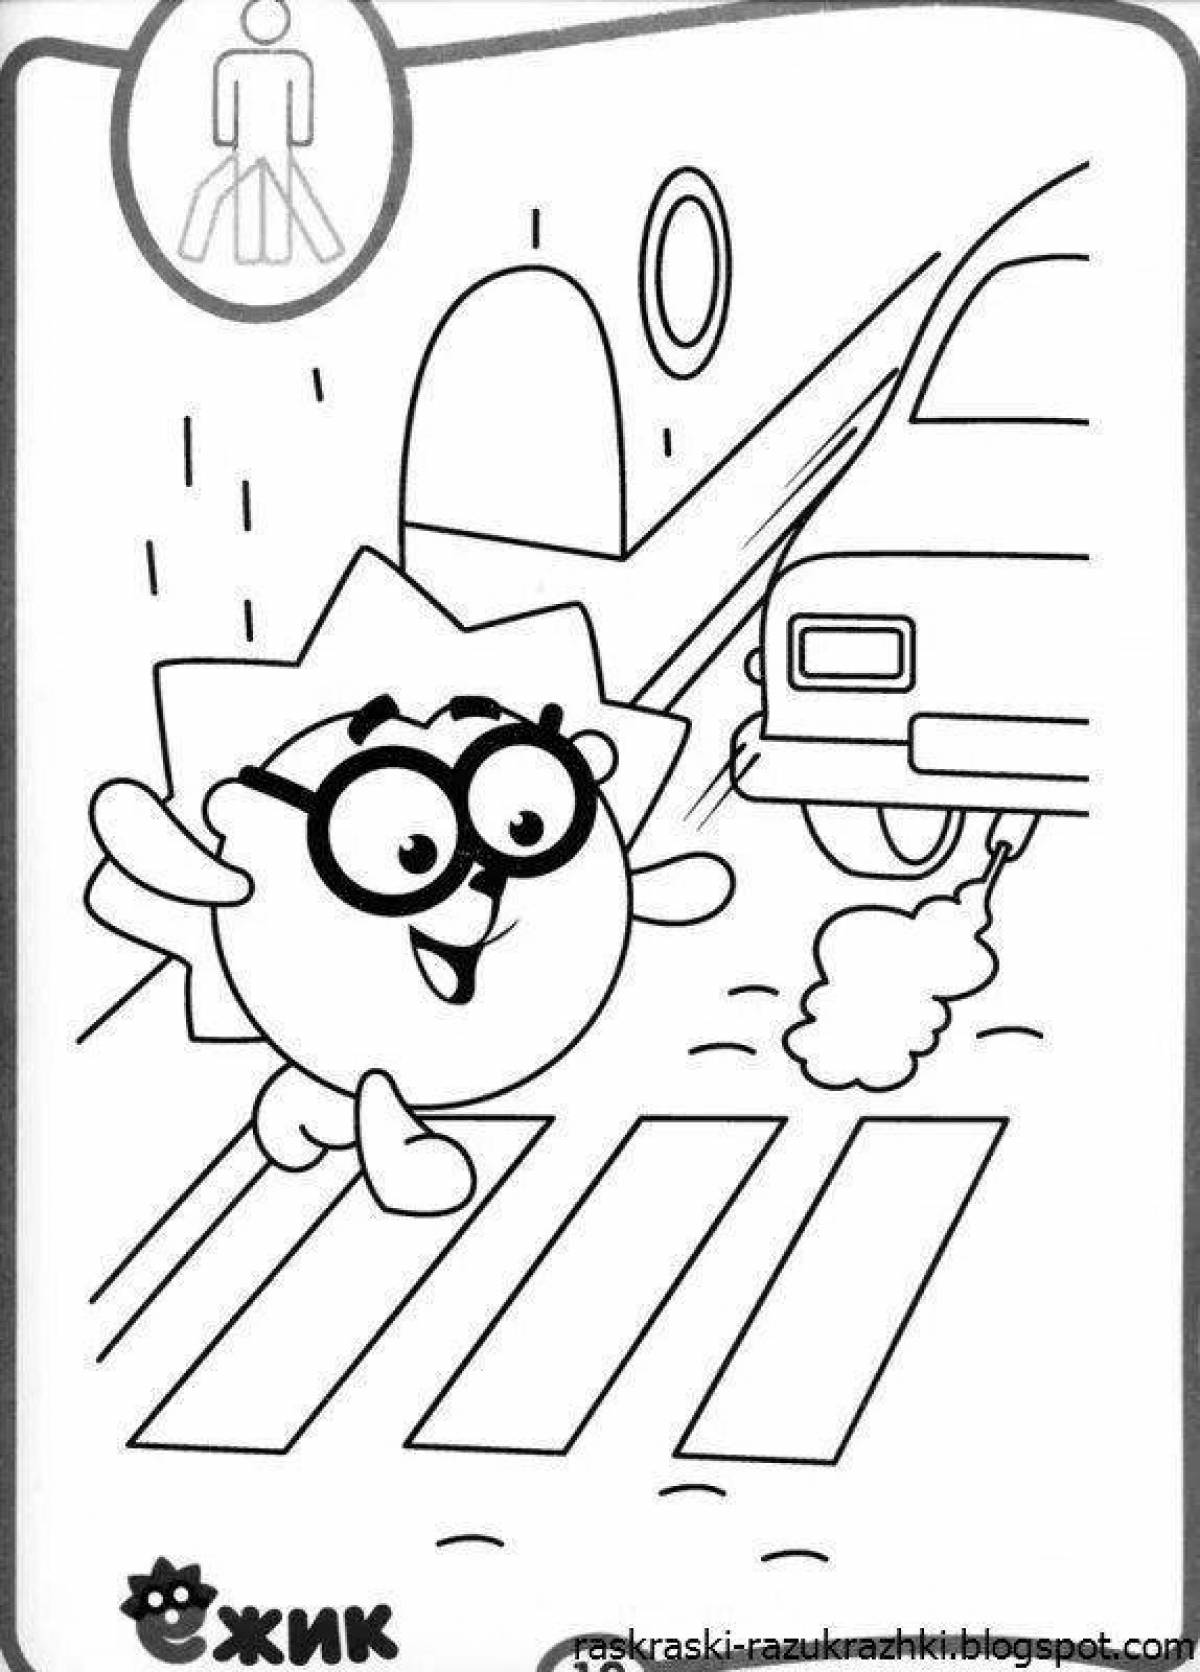 Bright rules of the road coloring pages for preschoolers